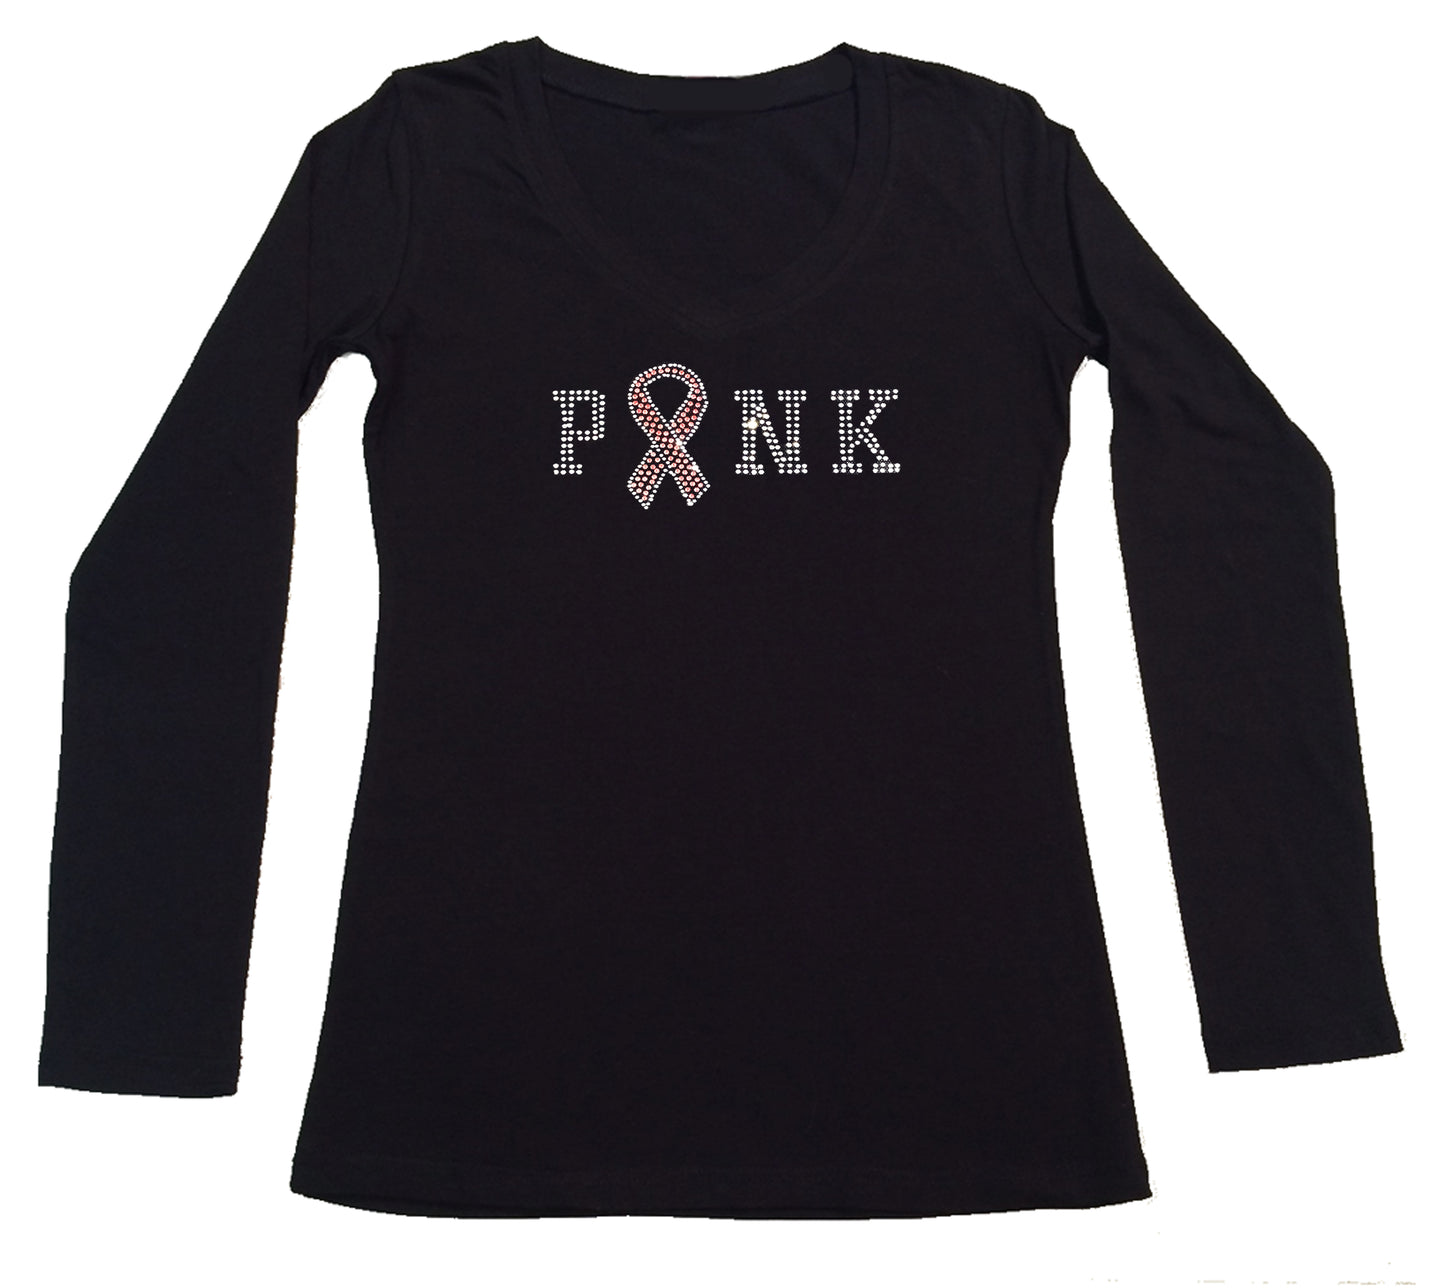 Womens T-shirt with Pink and Crystal Faith Cross in Rhinestones